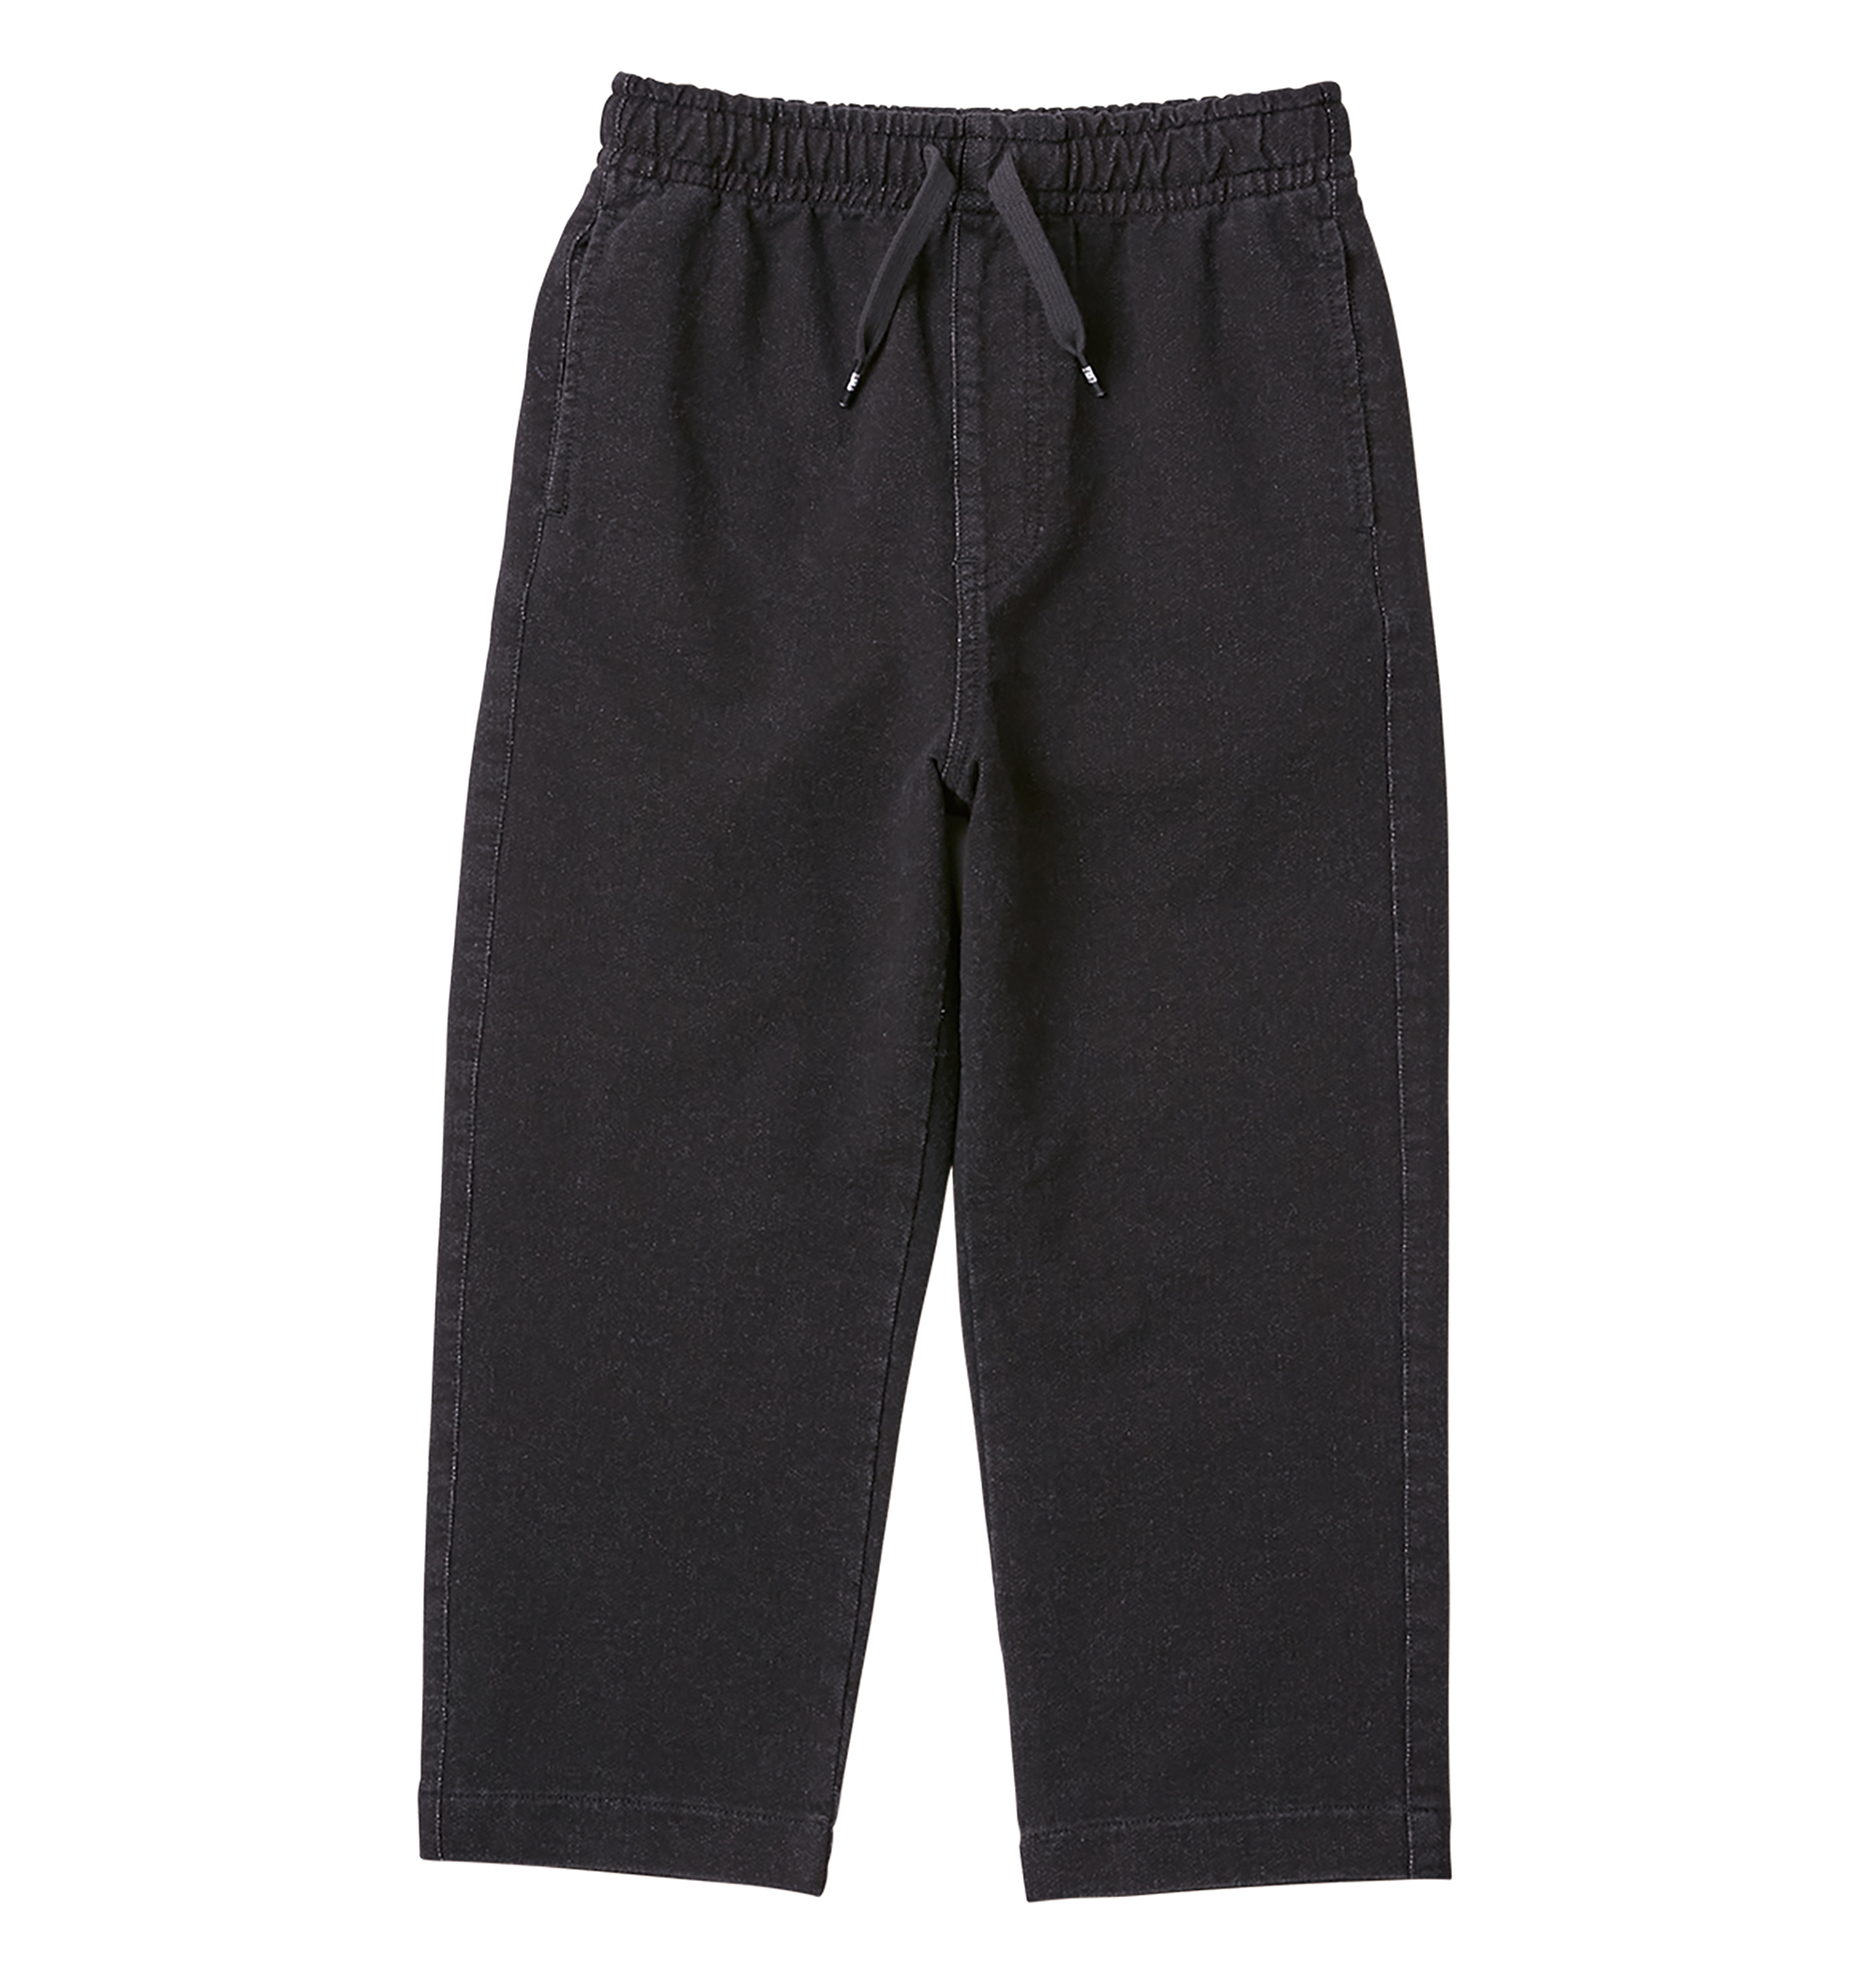  21 KD WIDE TAPERED JERSEY PANT デイリーユースに活躍するテーパードパンツ